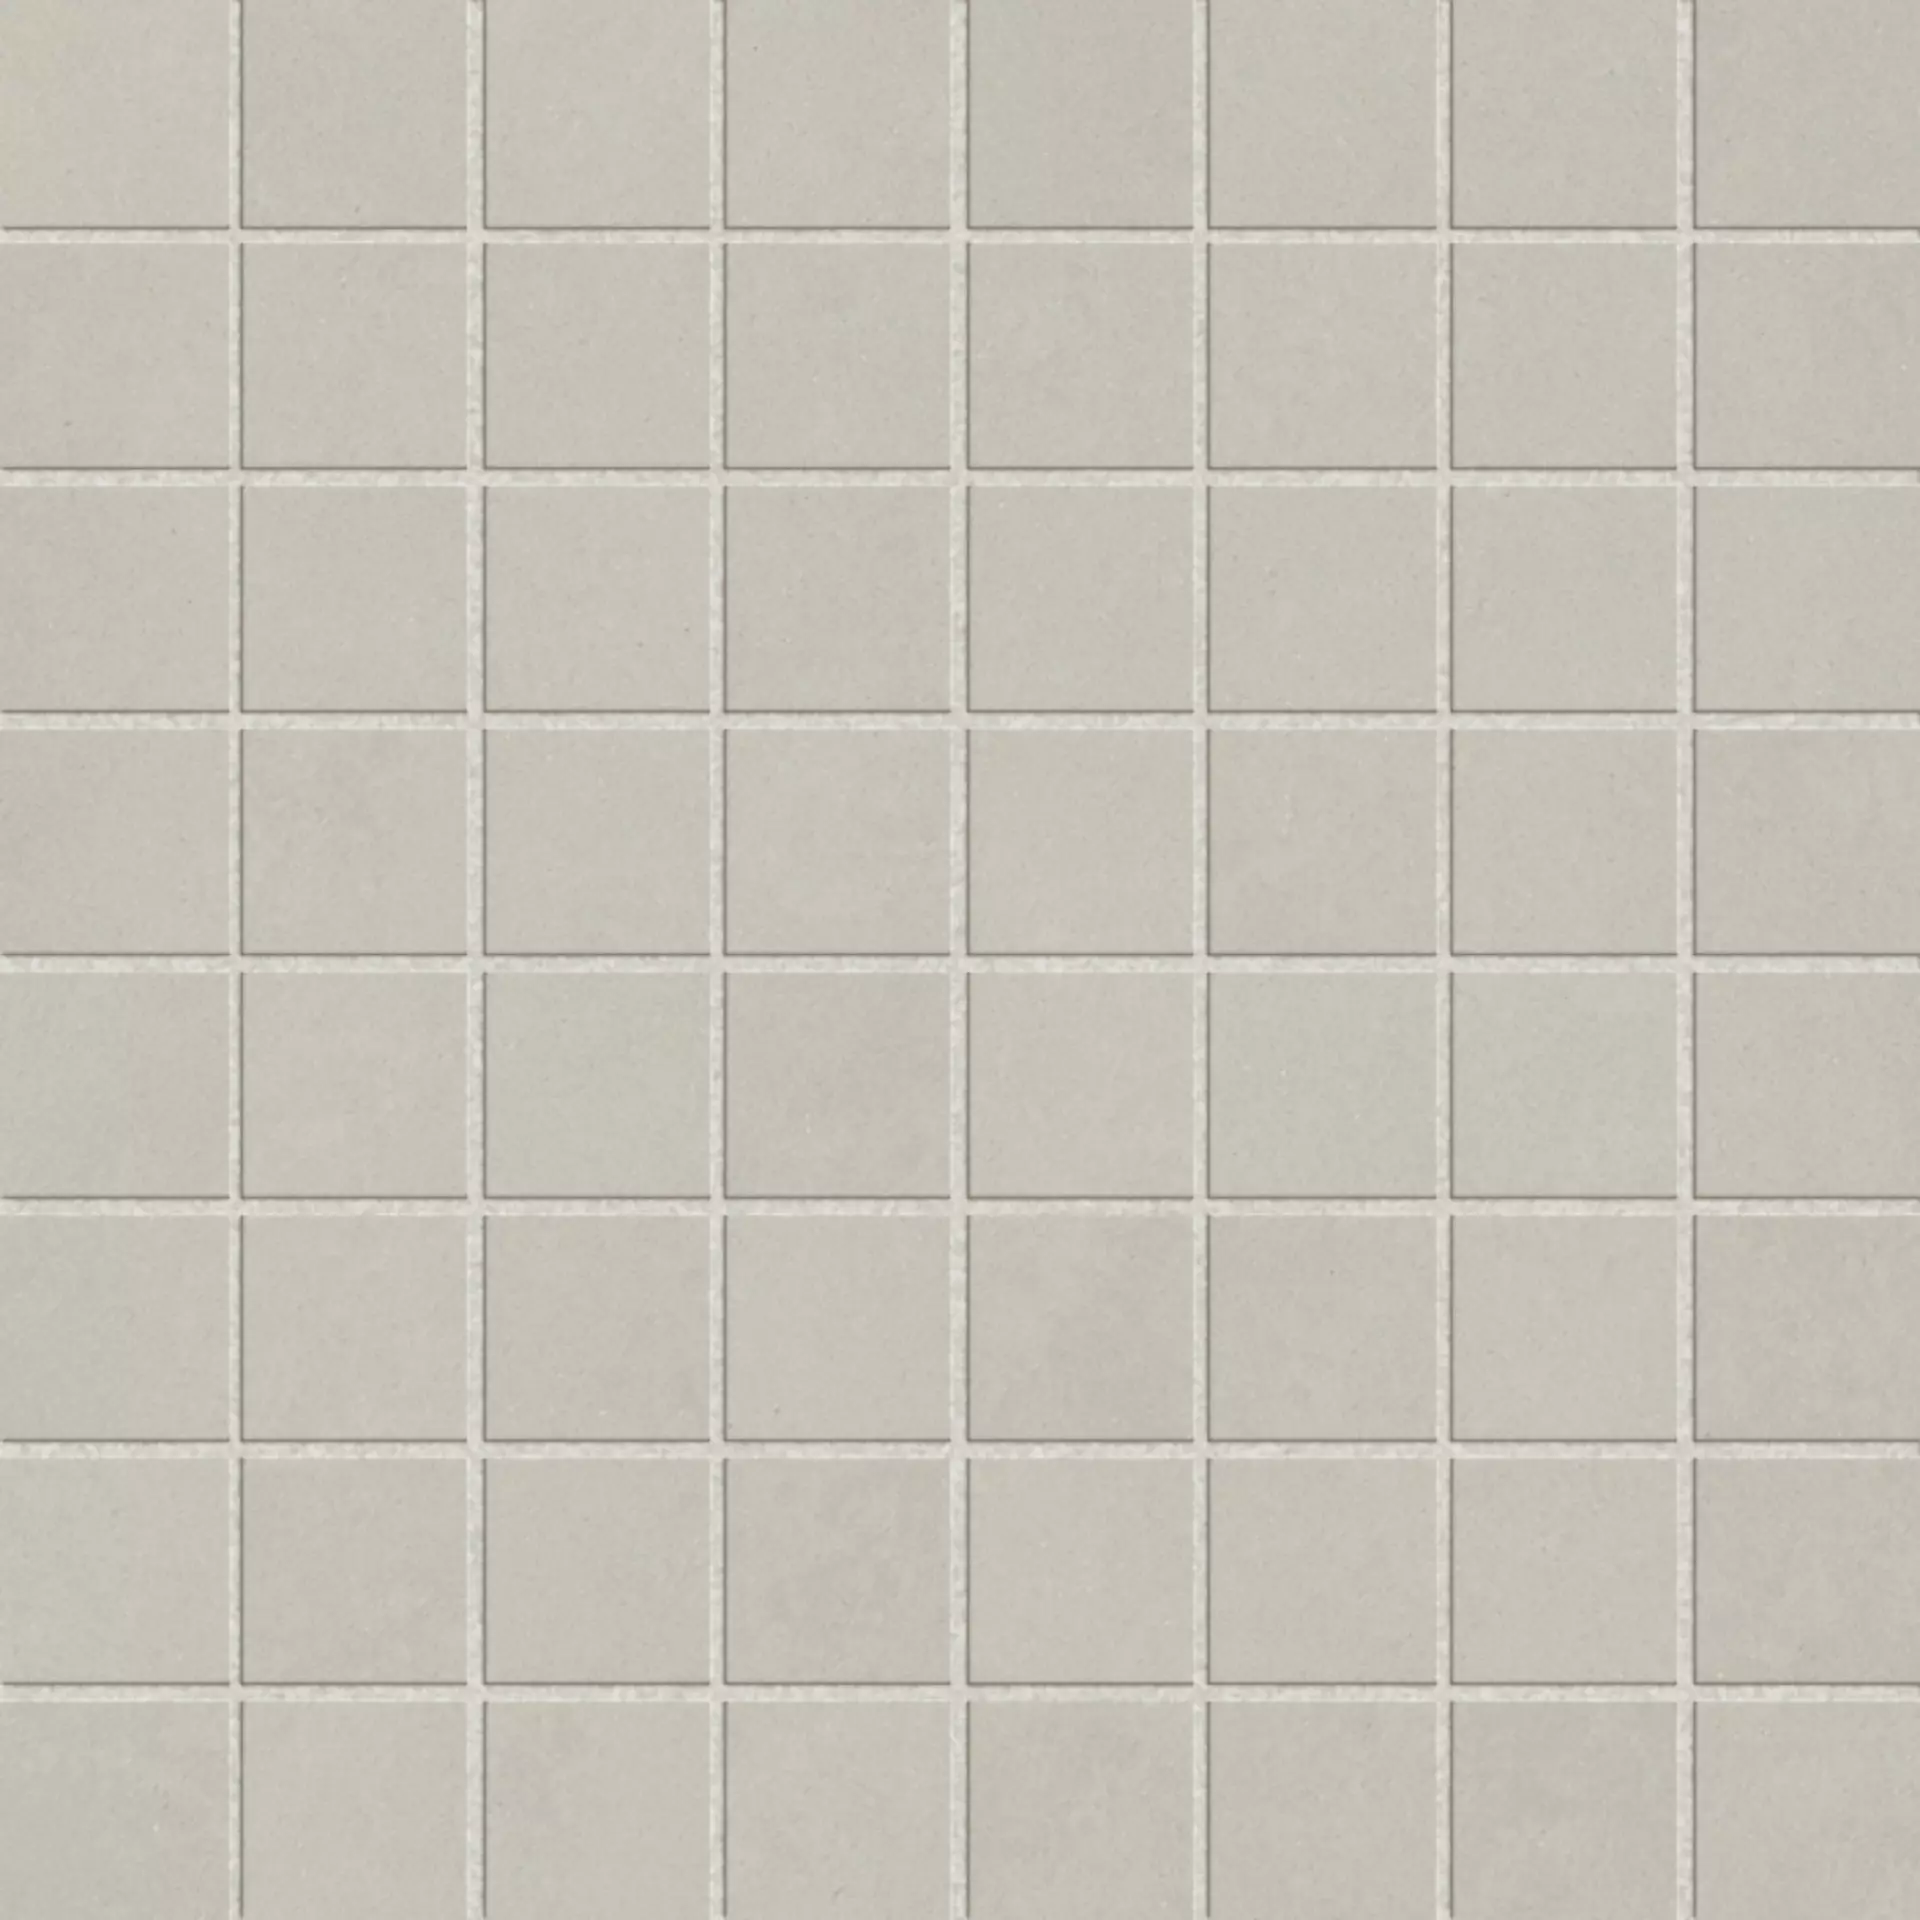 Margres Time 2.0 Silver Natural Mosaic 3,5x3,5 B25M33T26BF 30x30cm rectified 10,5mm